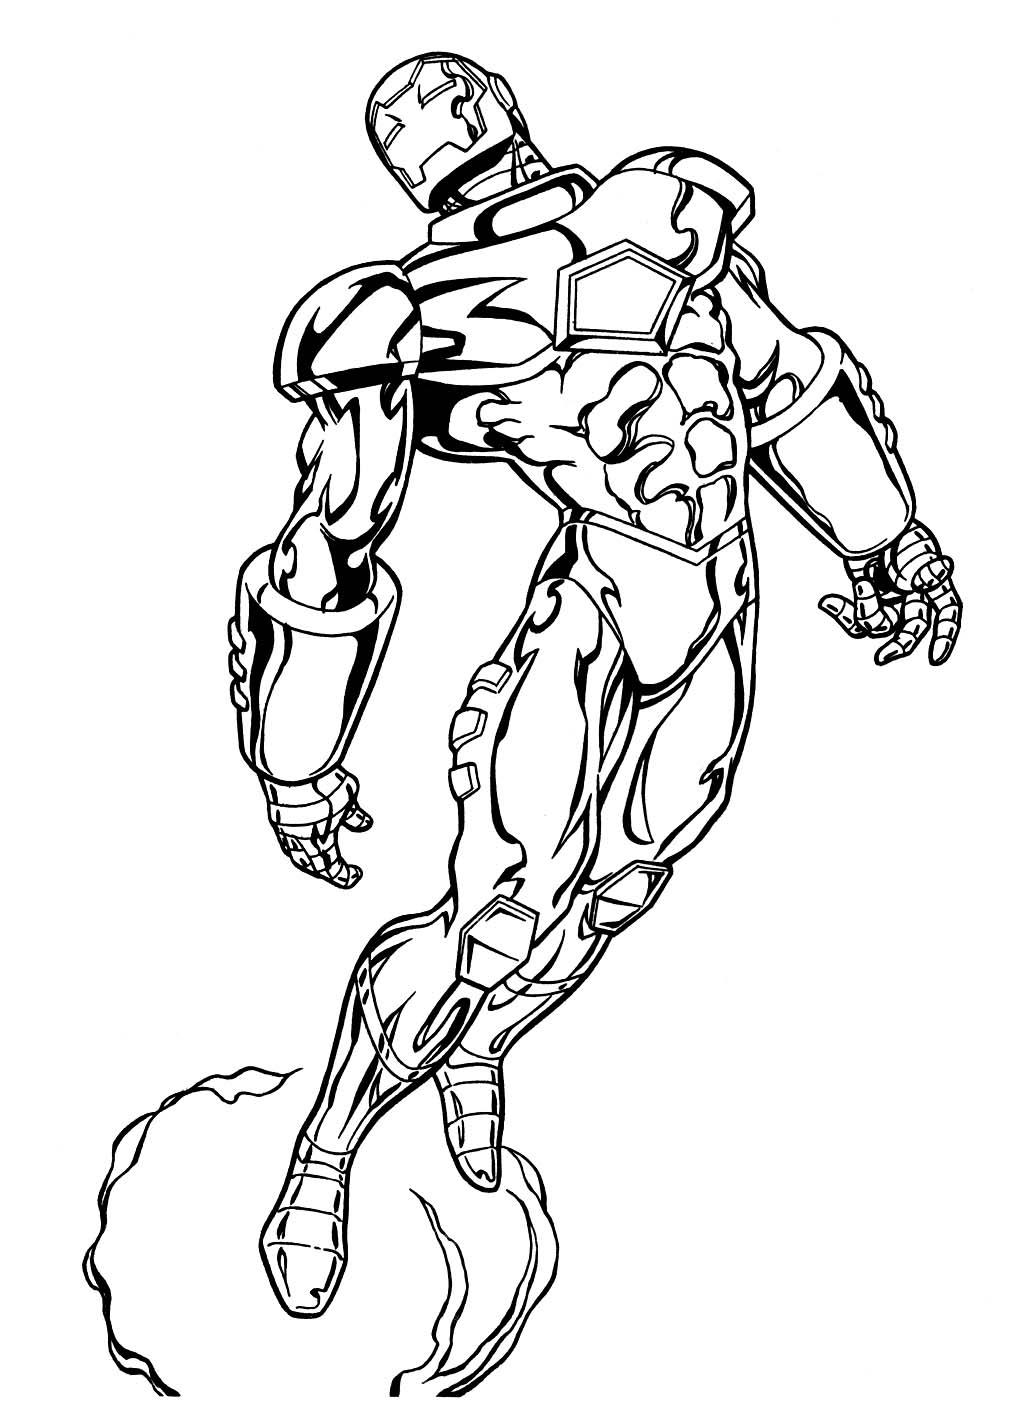 Marvel Superhero Coloring Pages